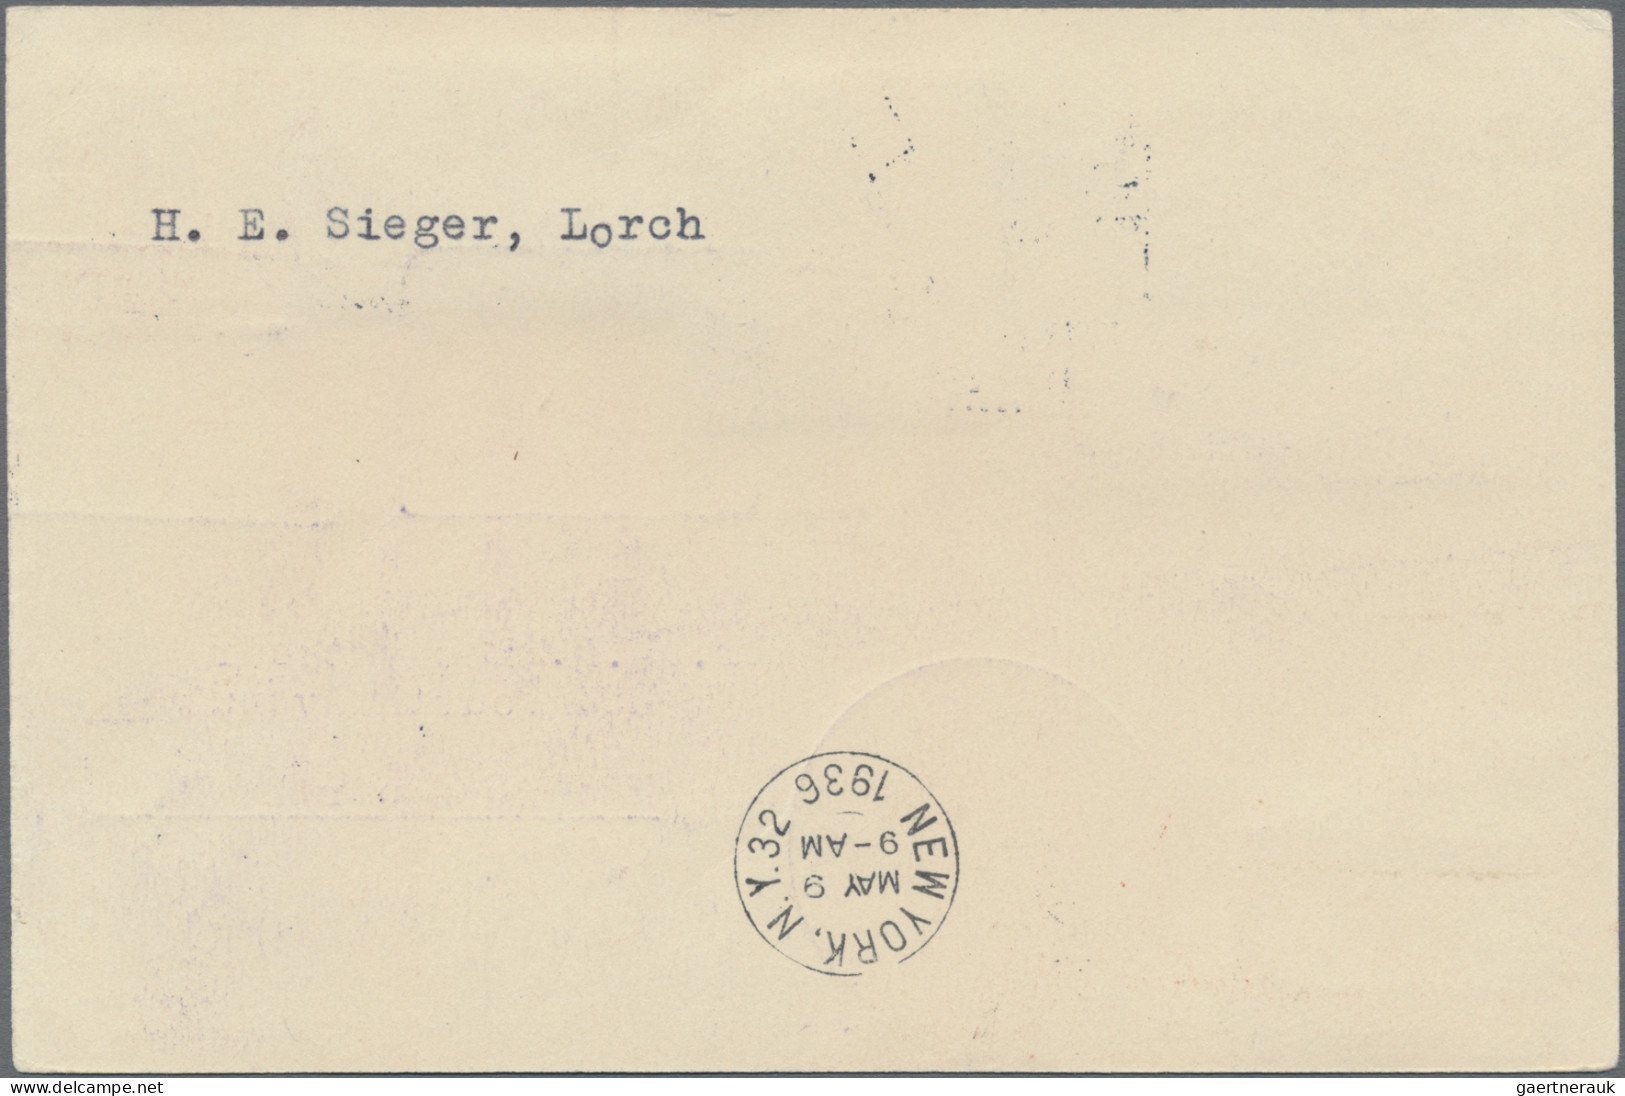 Zeppelin Mail - Europe: 1936, 1st North America Trip, Czechoslovakian Mail, Card - Andere-Europa